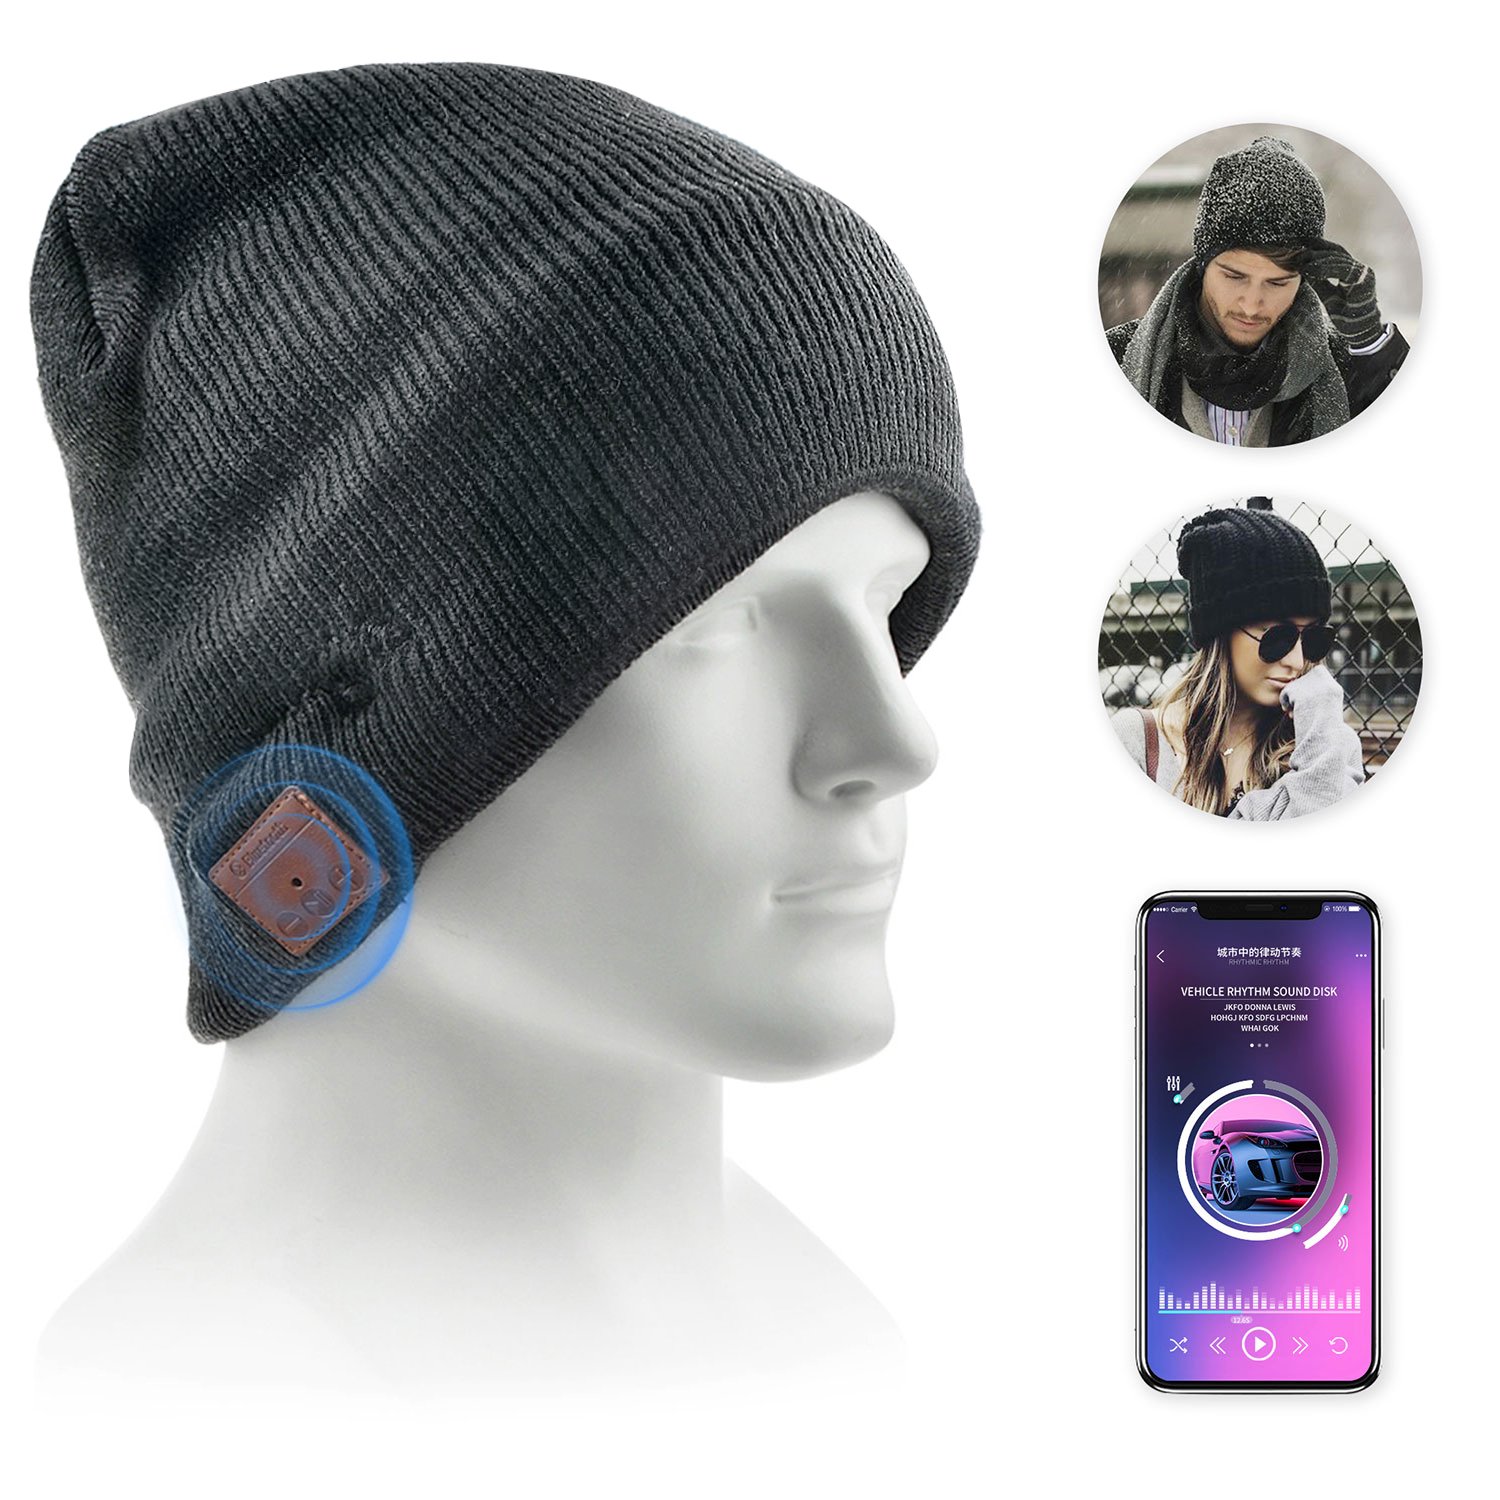 Bluetooth Beanie Hat for Men Women, Upgraded Wireless Bluetooth 5.0 Beanie Hat with Headphones Headset Earphone Knitted Beanie with Stereo Speakers and Mic for Women Men - image 1 of 9